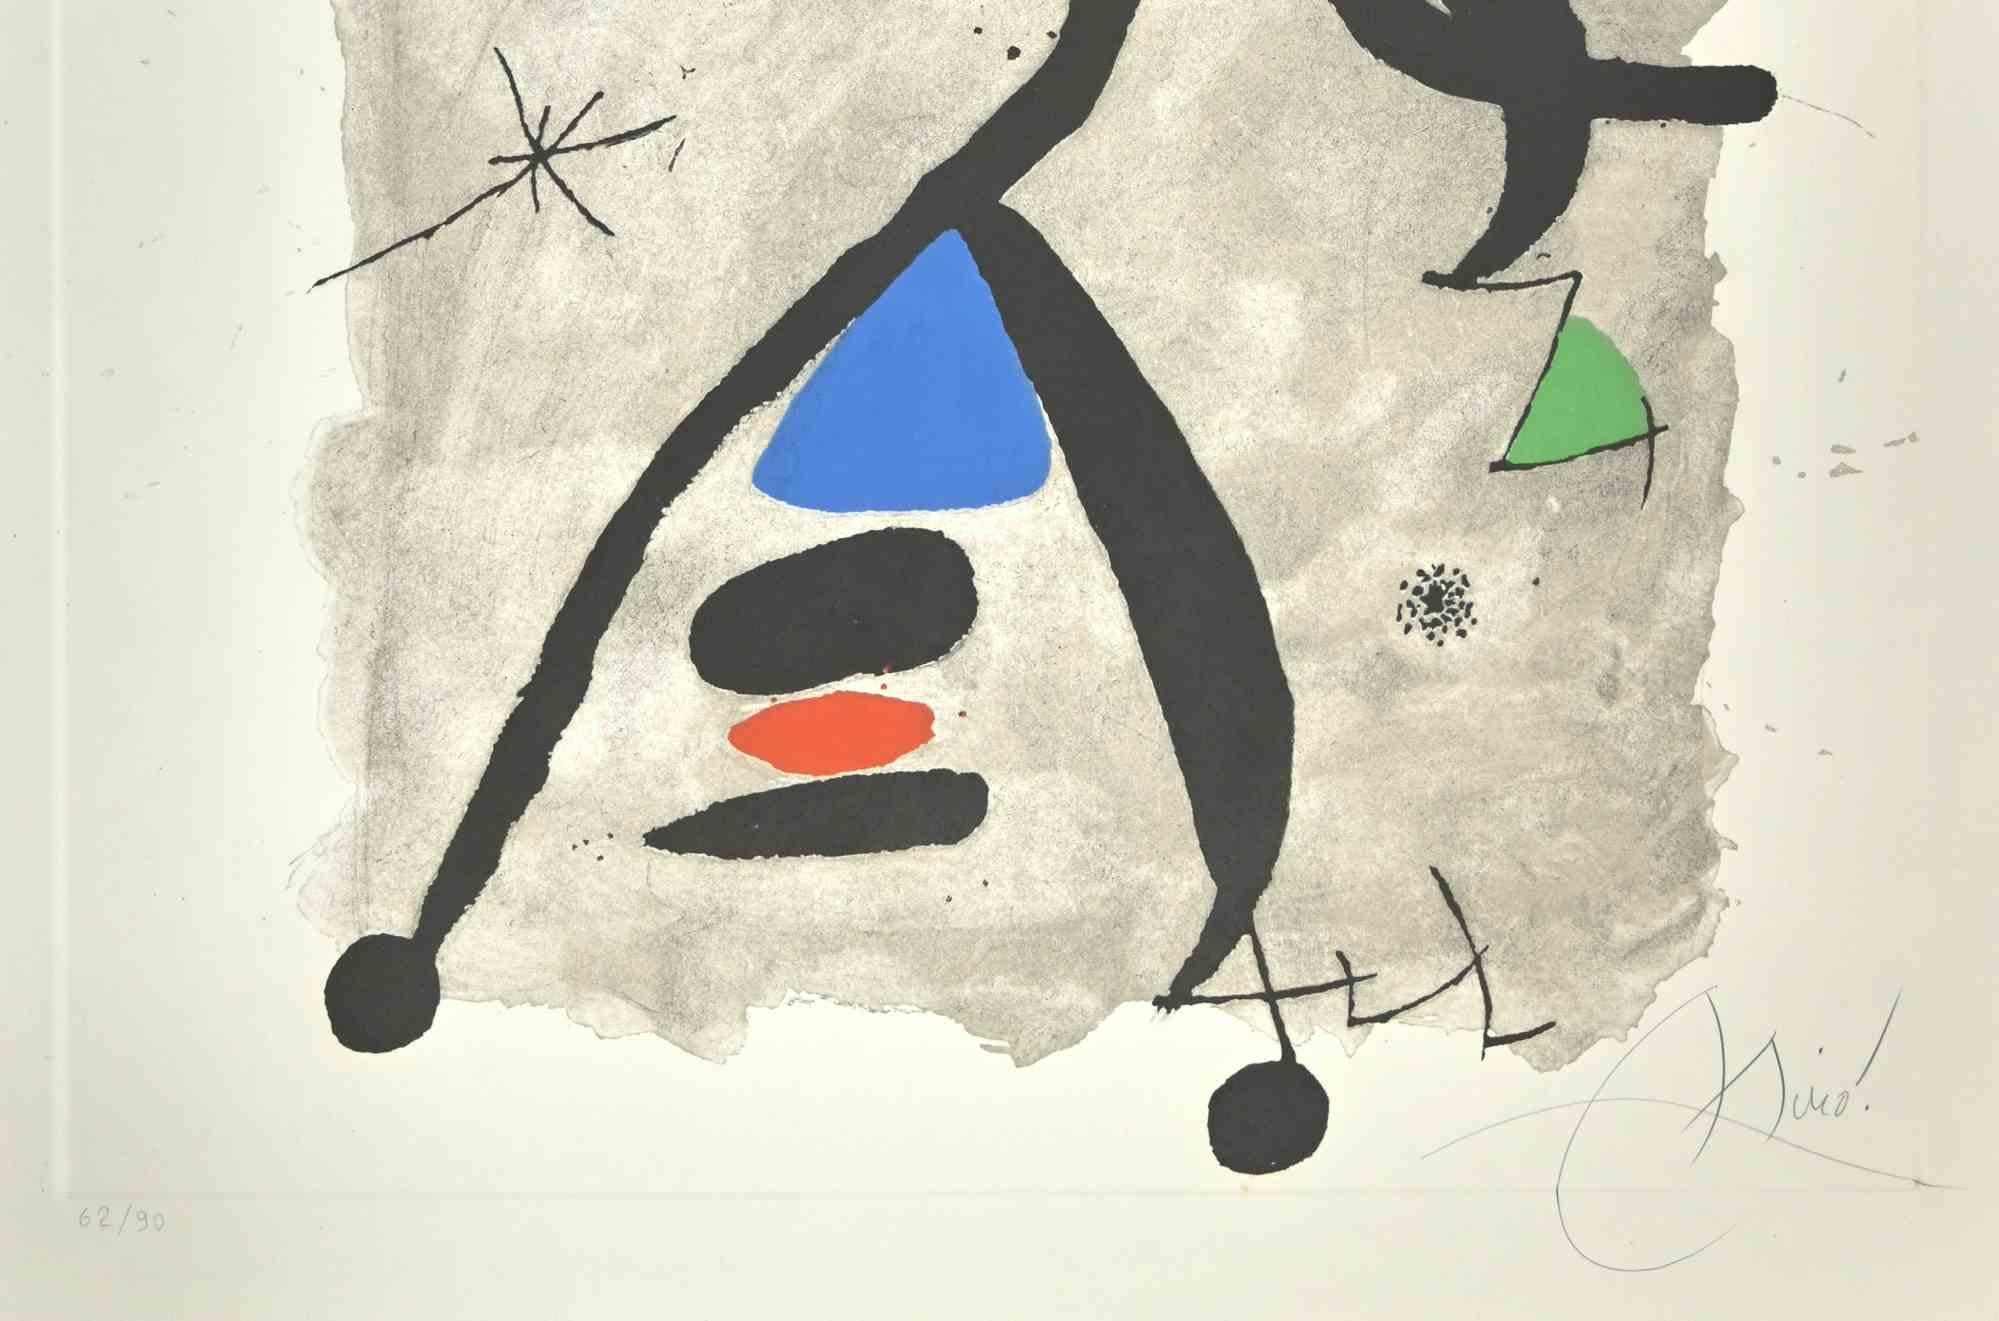 For Alberti, For Spain - Etching by Joan Mirò - 1975 - Print by Joan Miró